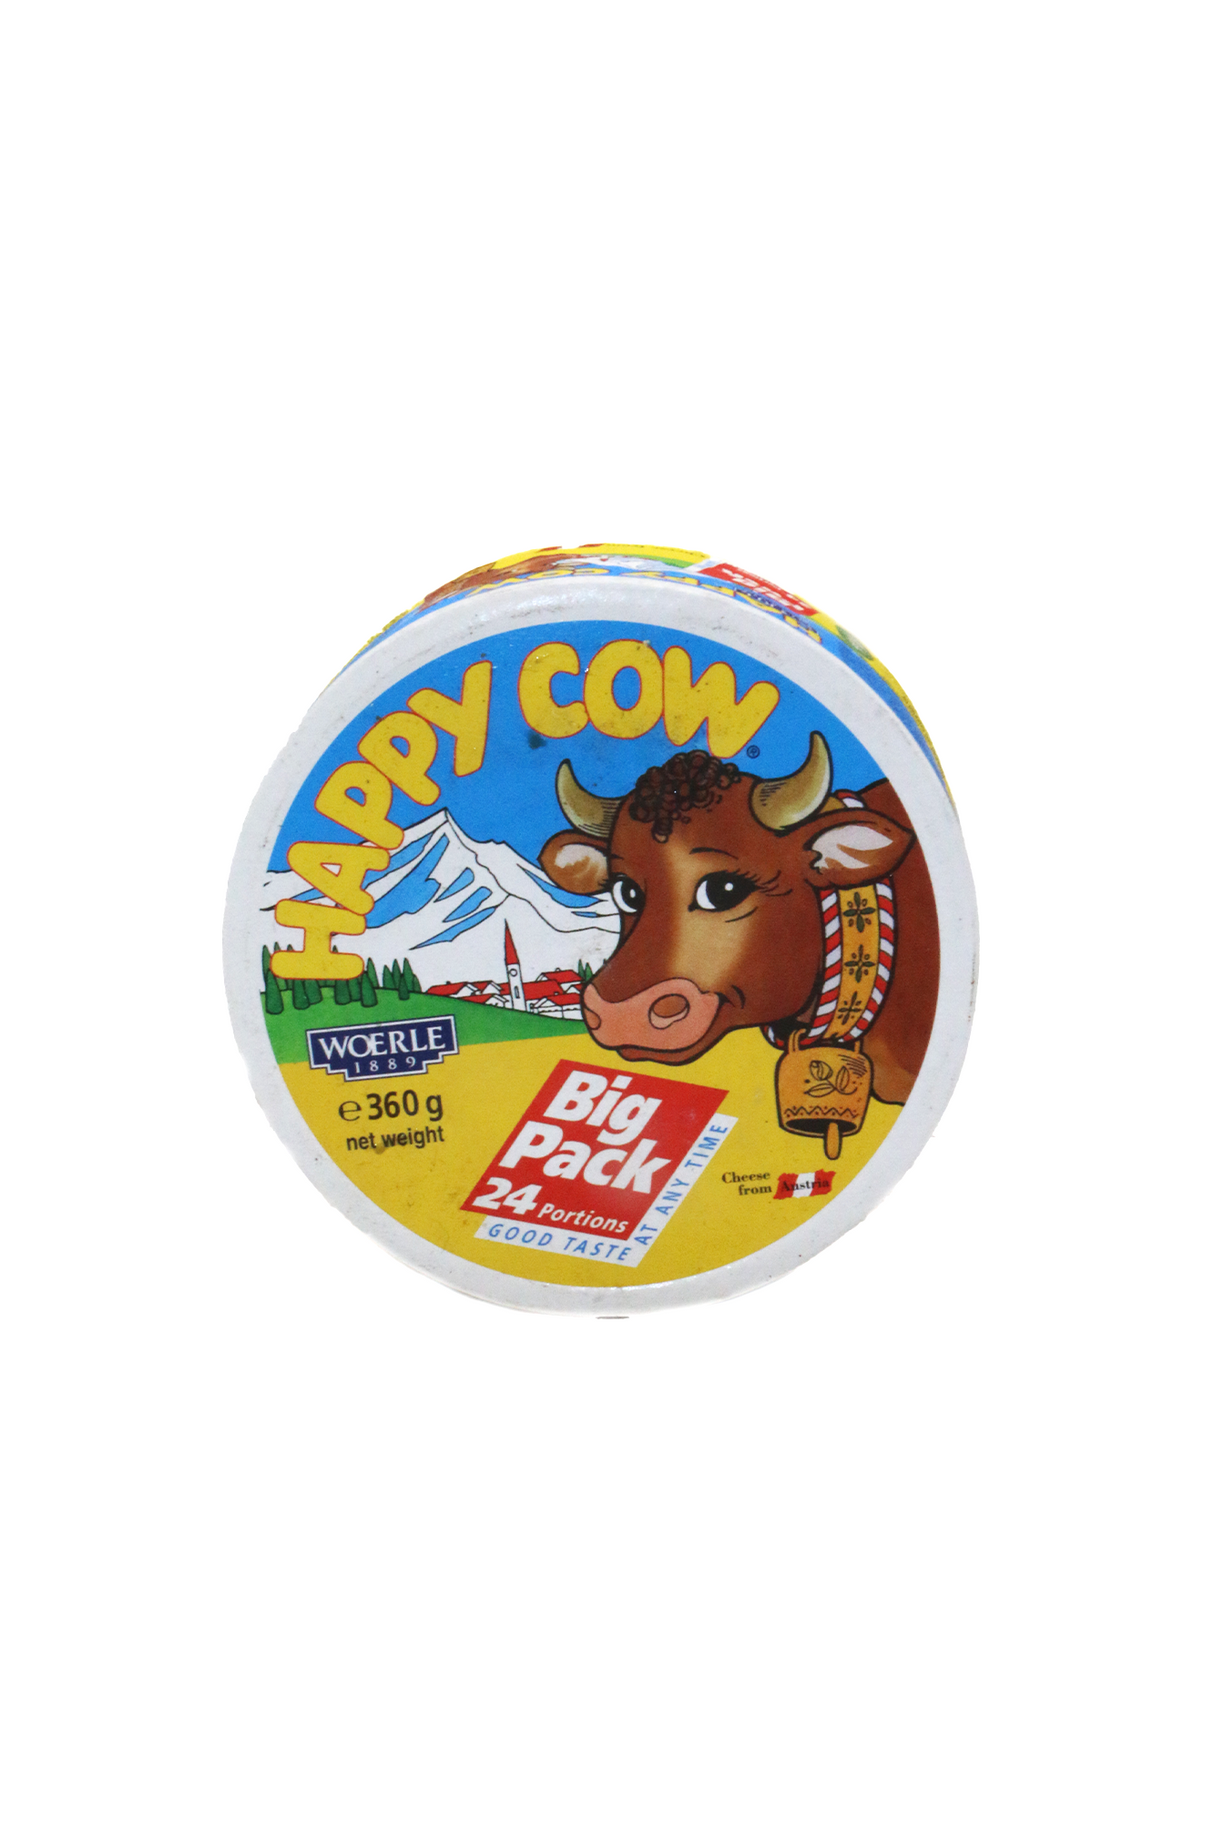 happy cow cheese big pack 360g